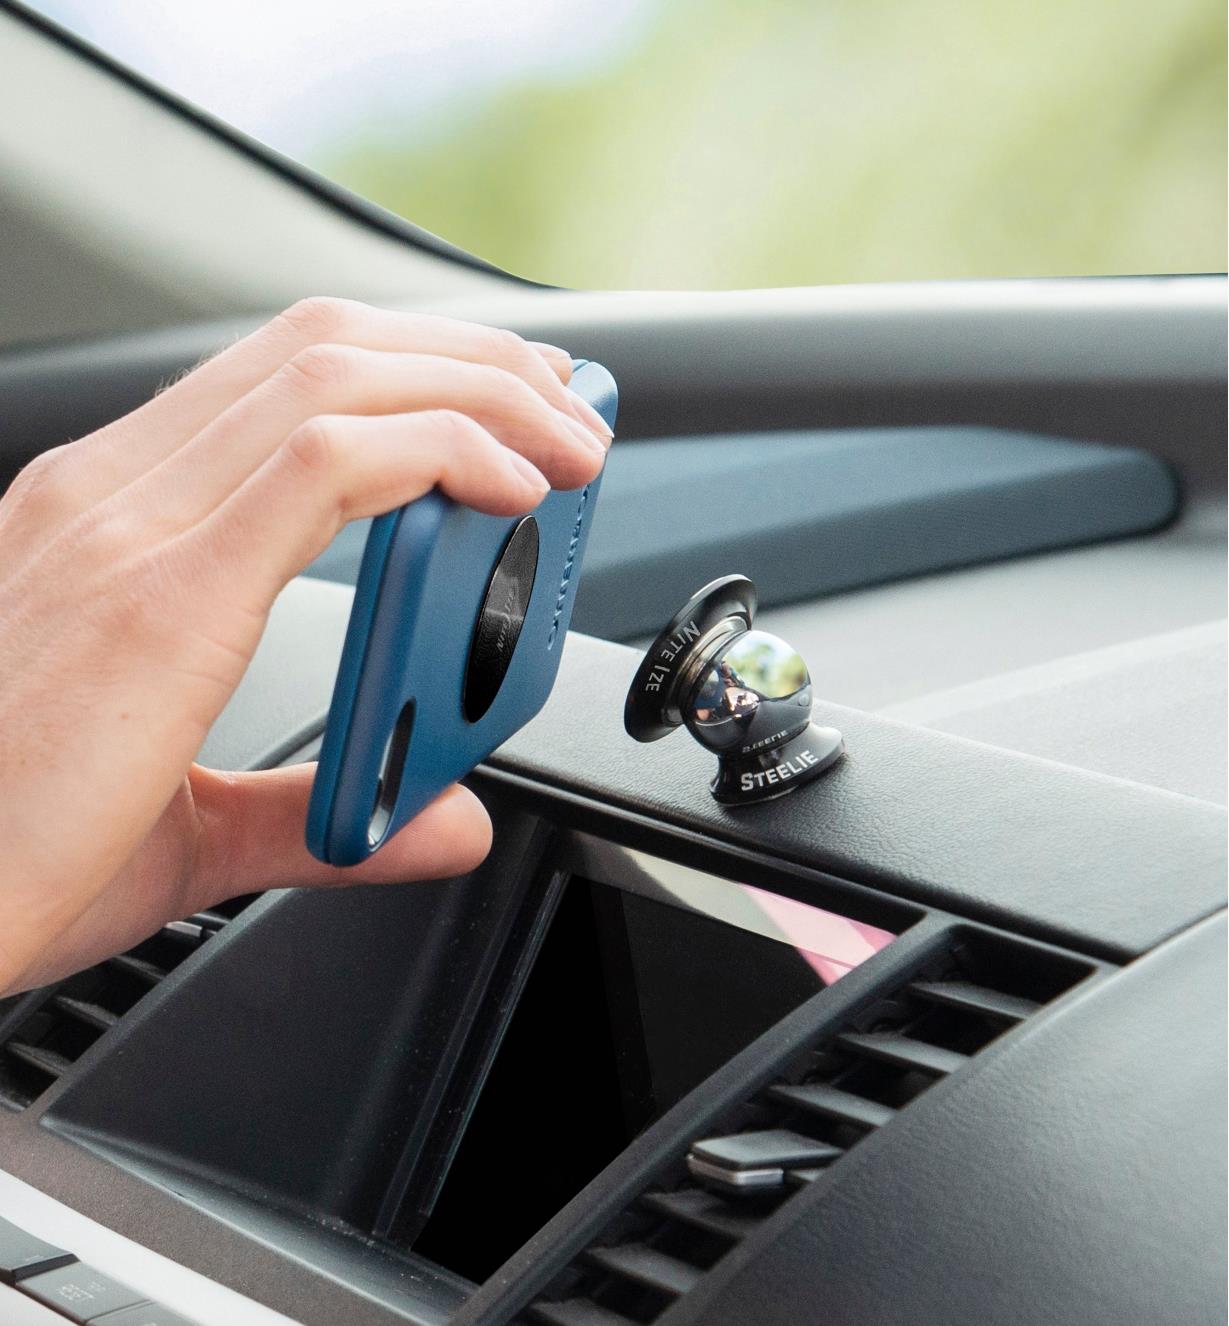 Attaching a cell phone to a dashboard-mount kit installed on a car dashboard 